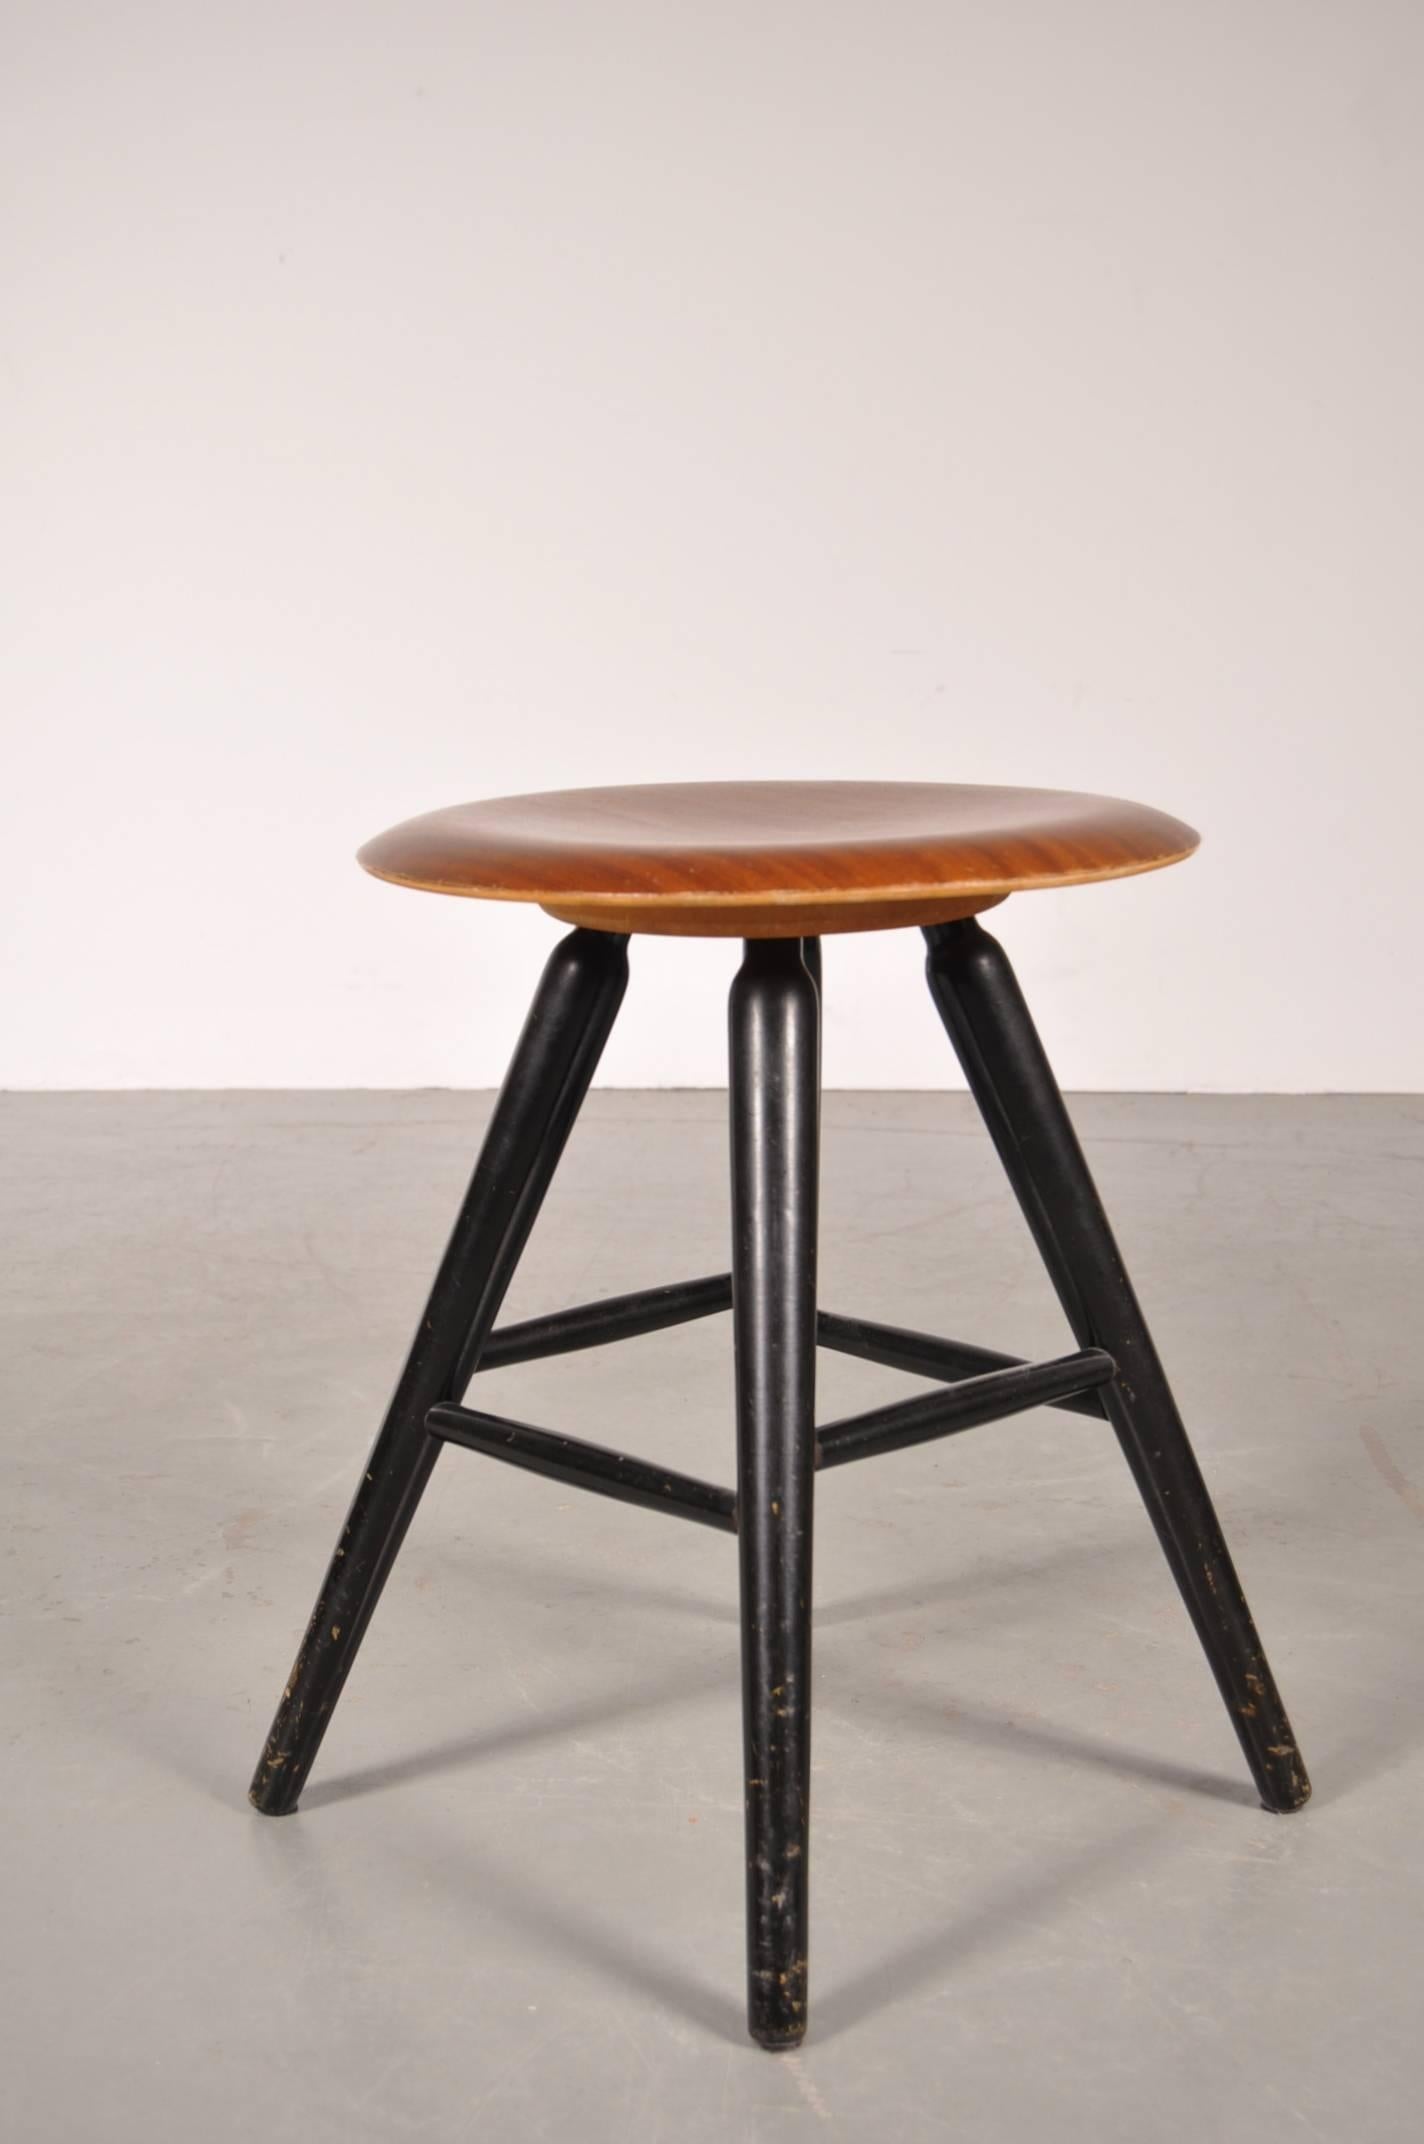 Beautiful wooden stool designed in the style of Ilmari Tapiovaara, manufactured around 1950.

The stool has a beautiful black wooden base with four legs and horizontal bars in different heights, creating extra stability as well as a nice design.